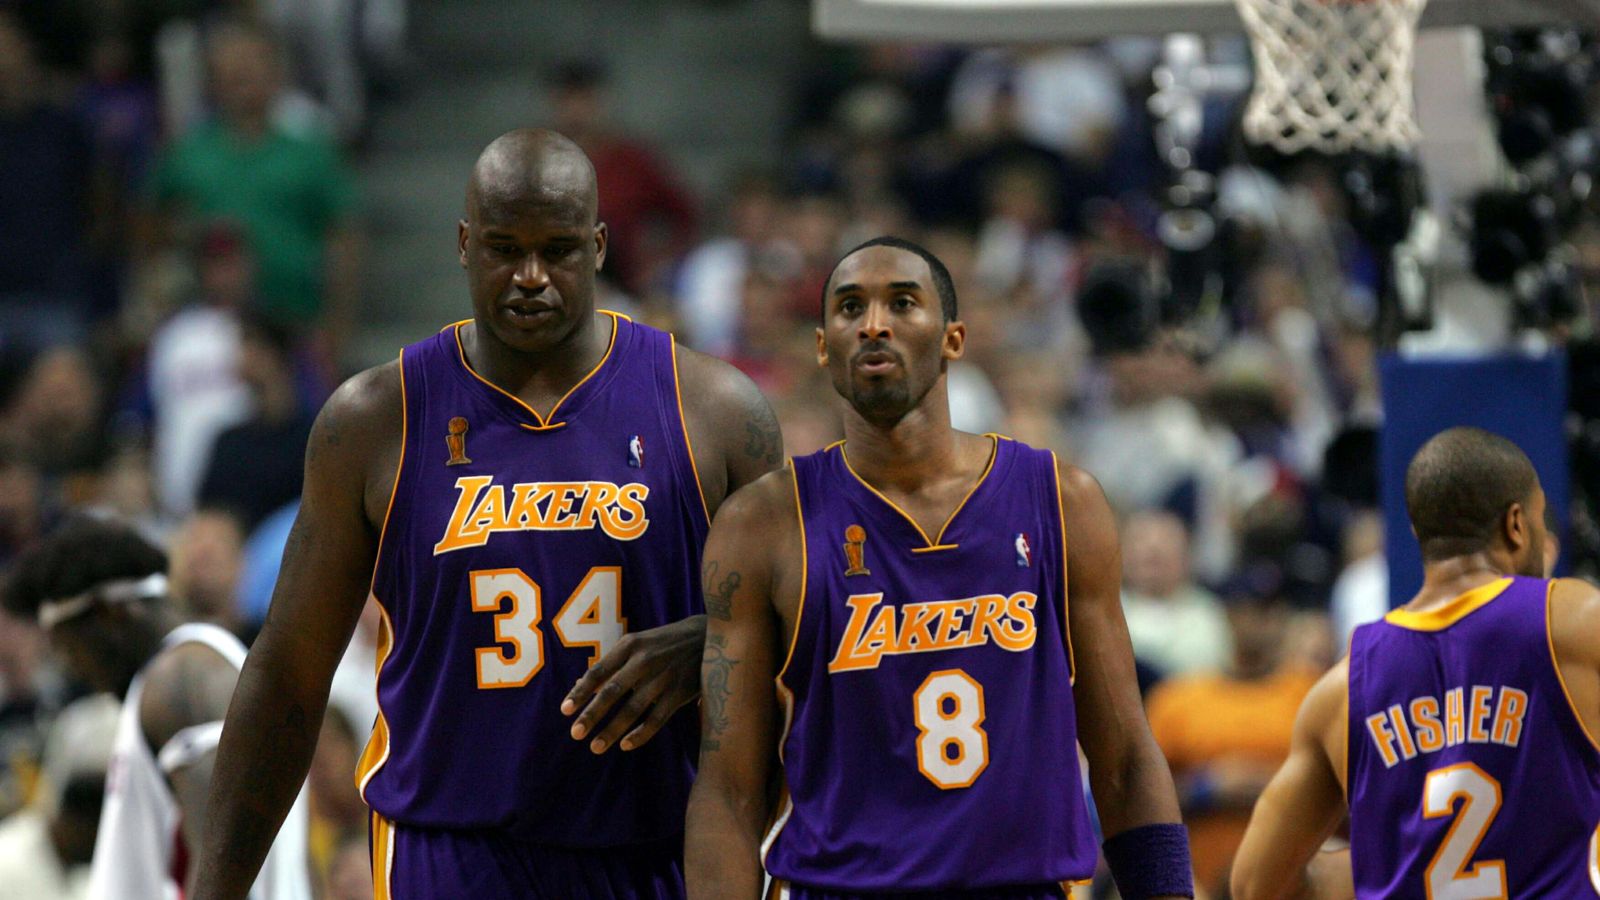 Kobe Bryant dismisses talk of fresh feud with Shaquille O'Neal | NBA ...